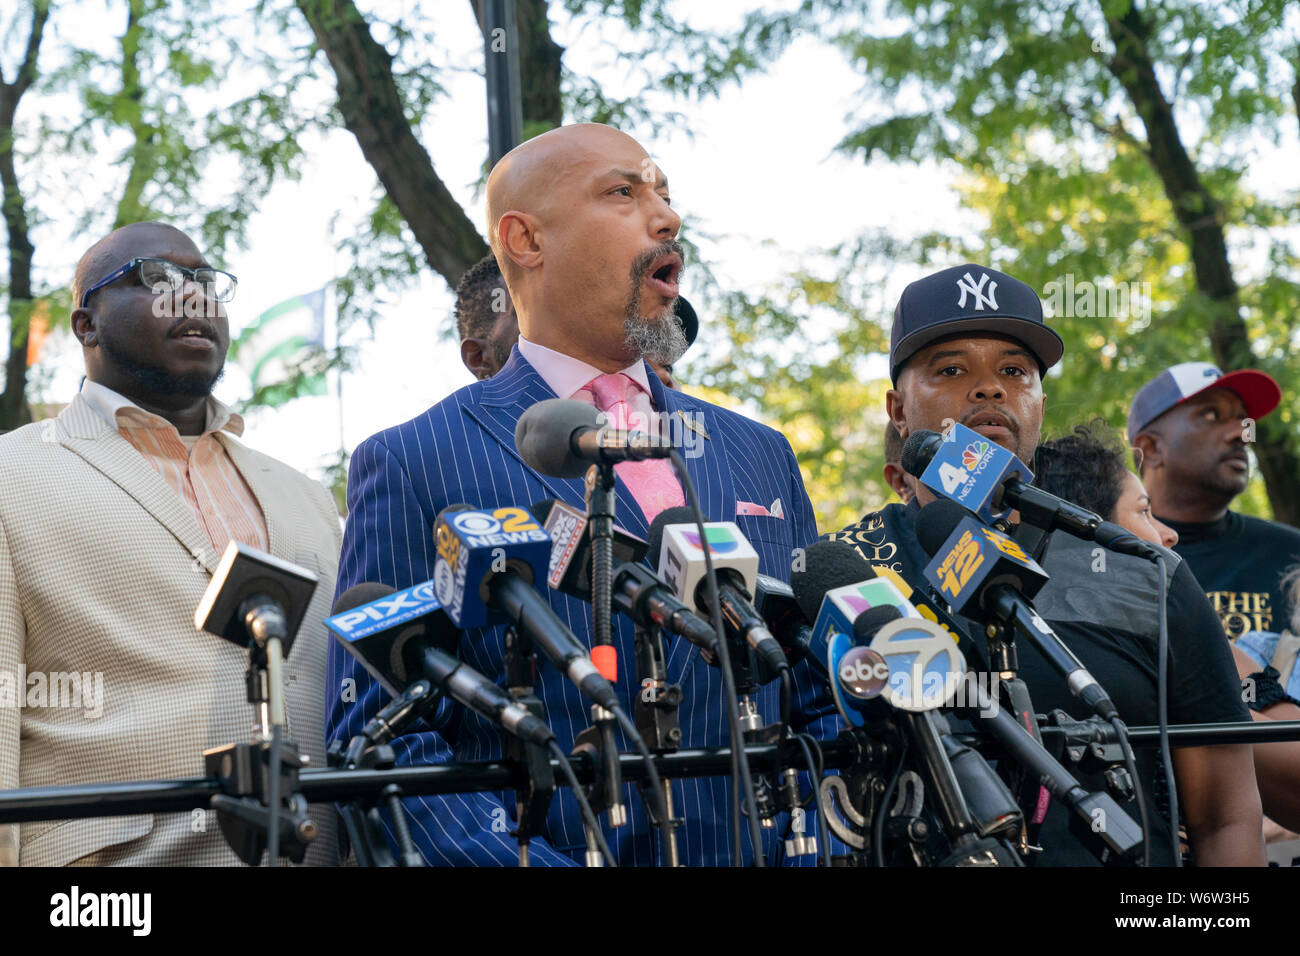 New York, NY - August 2, 2019: Elder Kirsten speaks at rally and press conference to demand firing police officer Daniel Pantaleo accused of using banned chokehold on Eric Garner at 1 Police Plaza Stock Photo